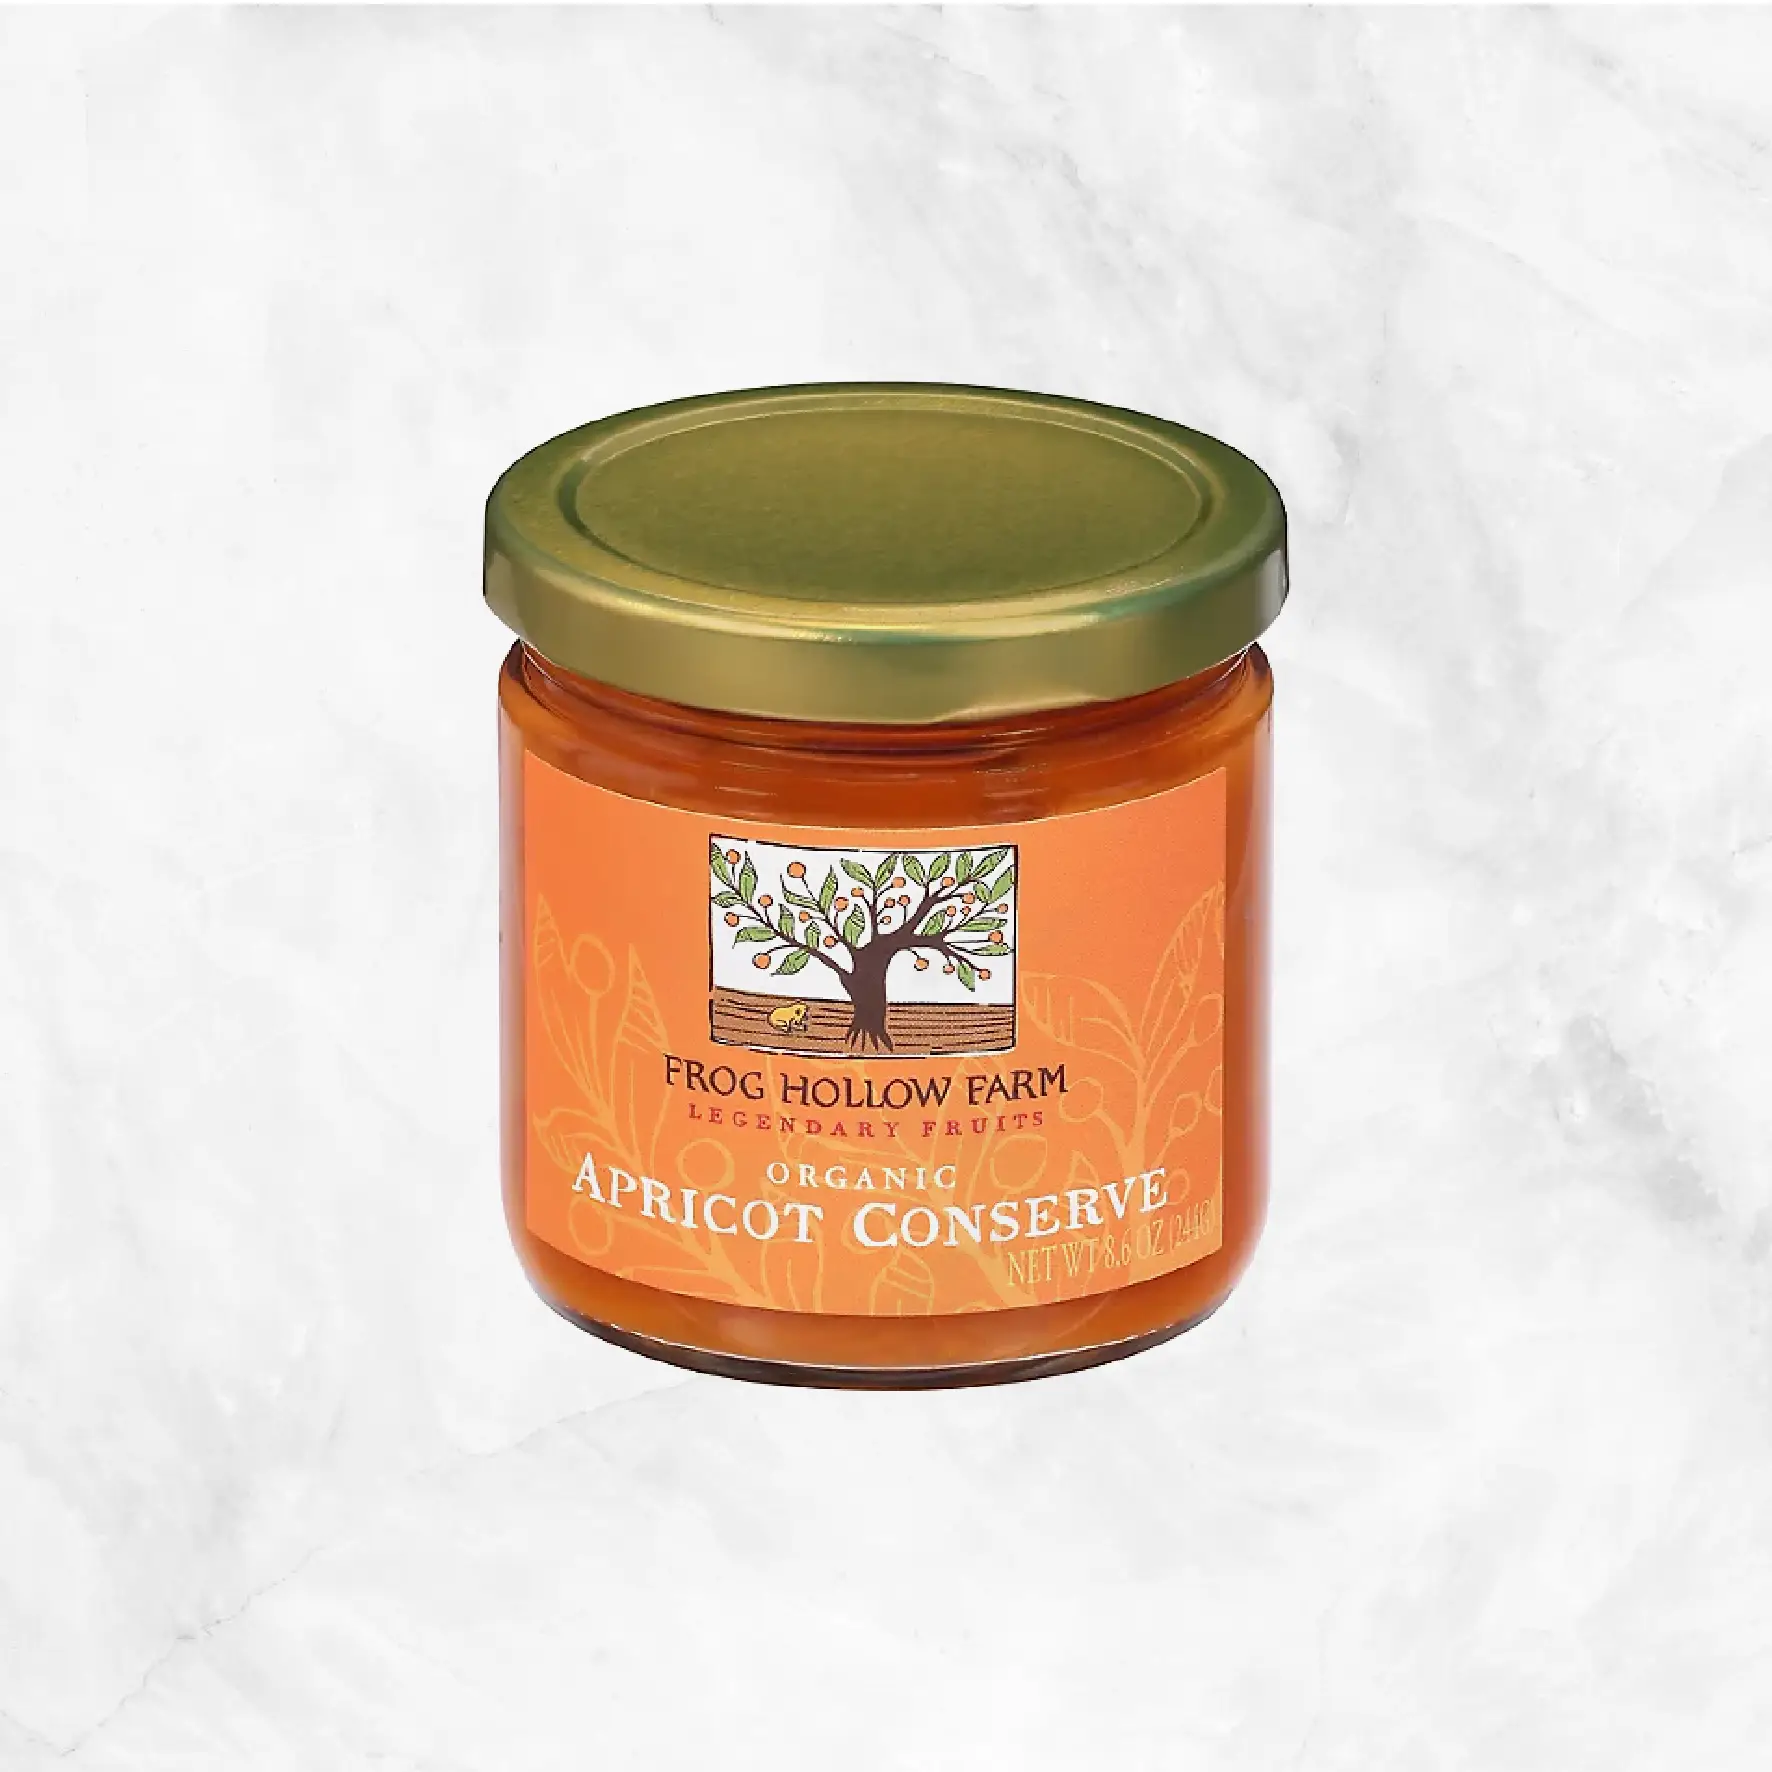 Organic Apricot Conserve Delivery